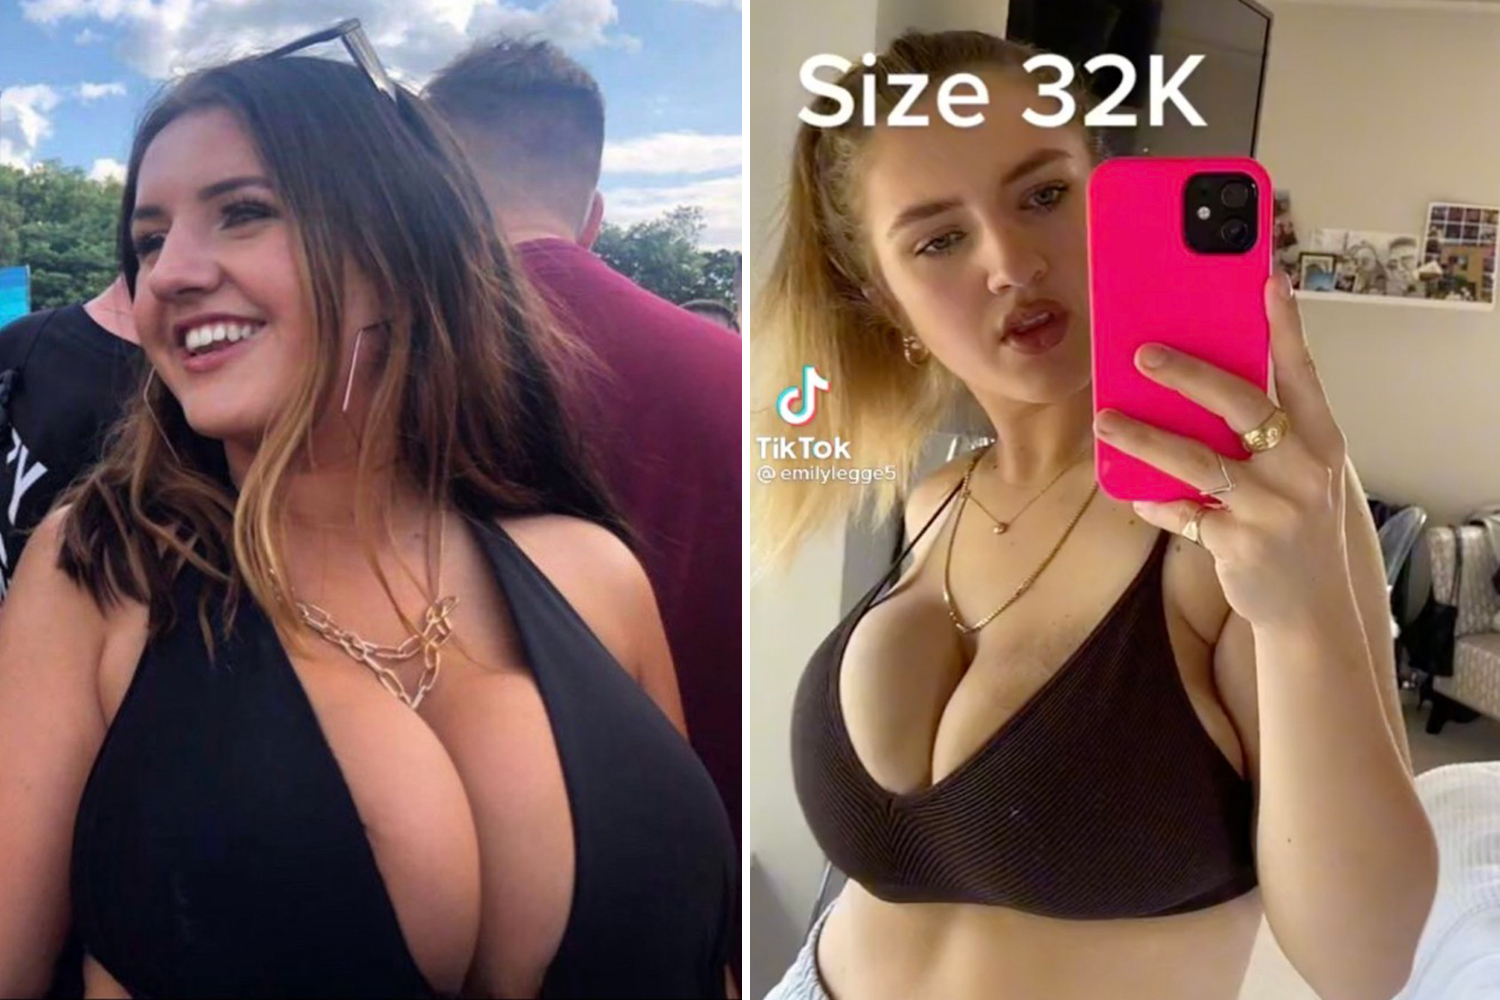 arnold apawan recommends big tits on phone pic